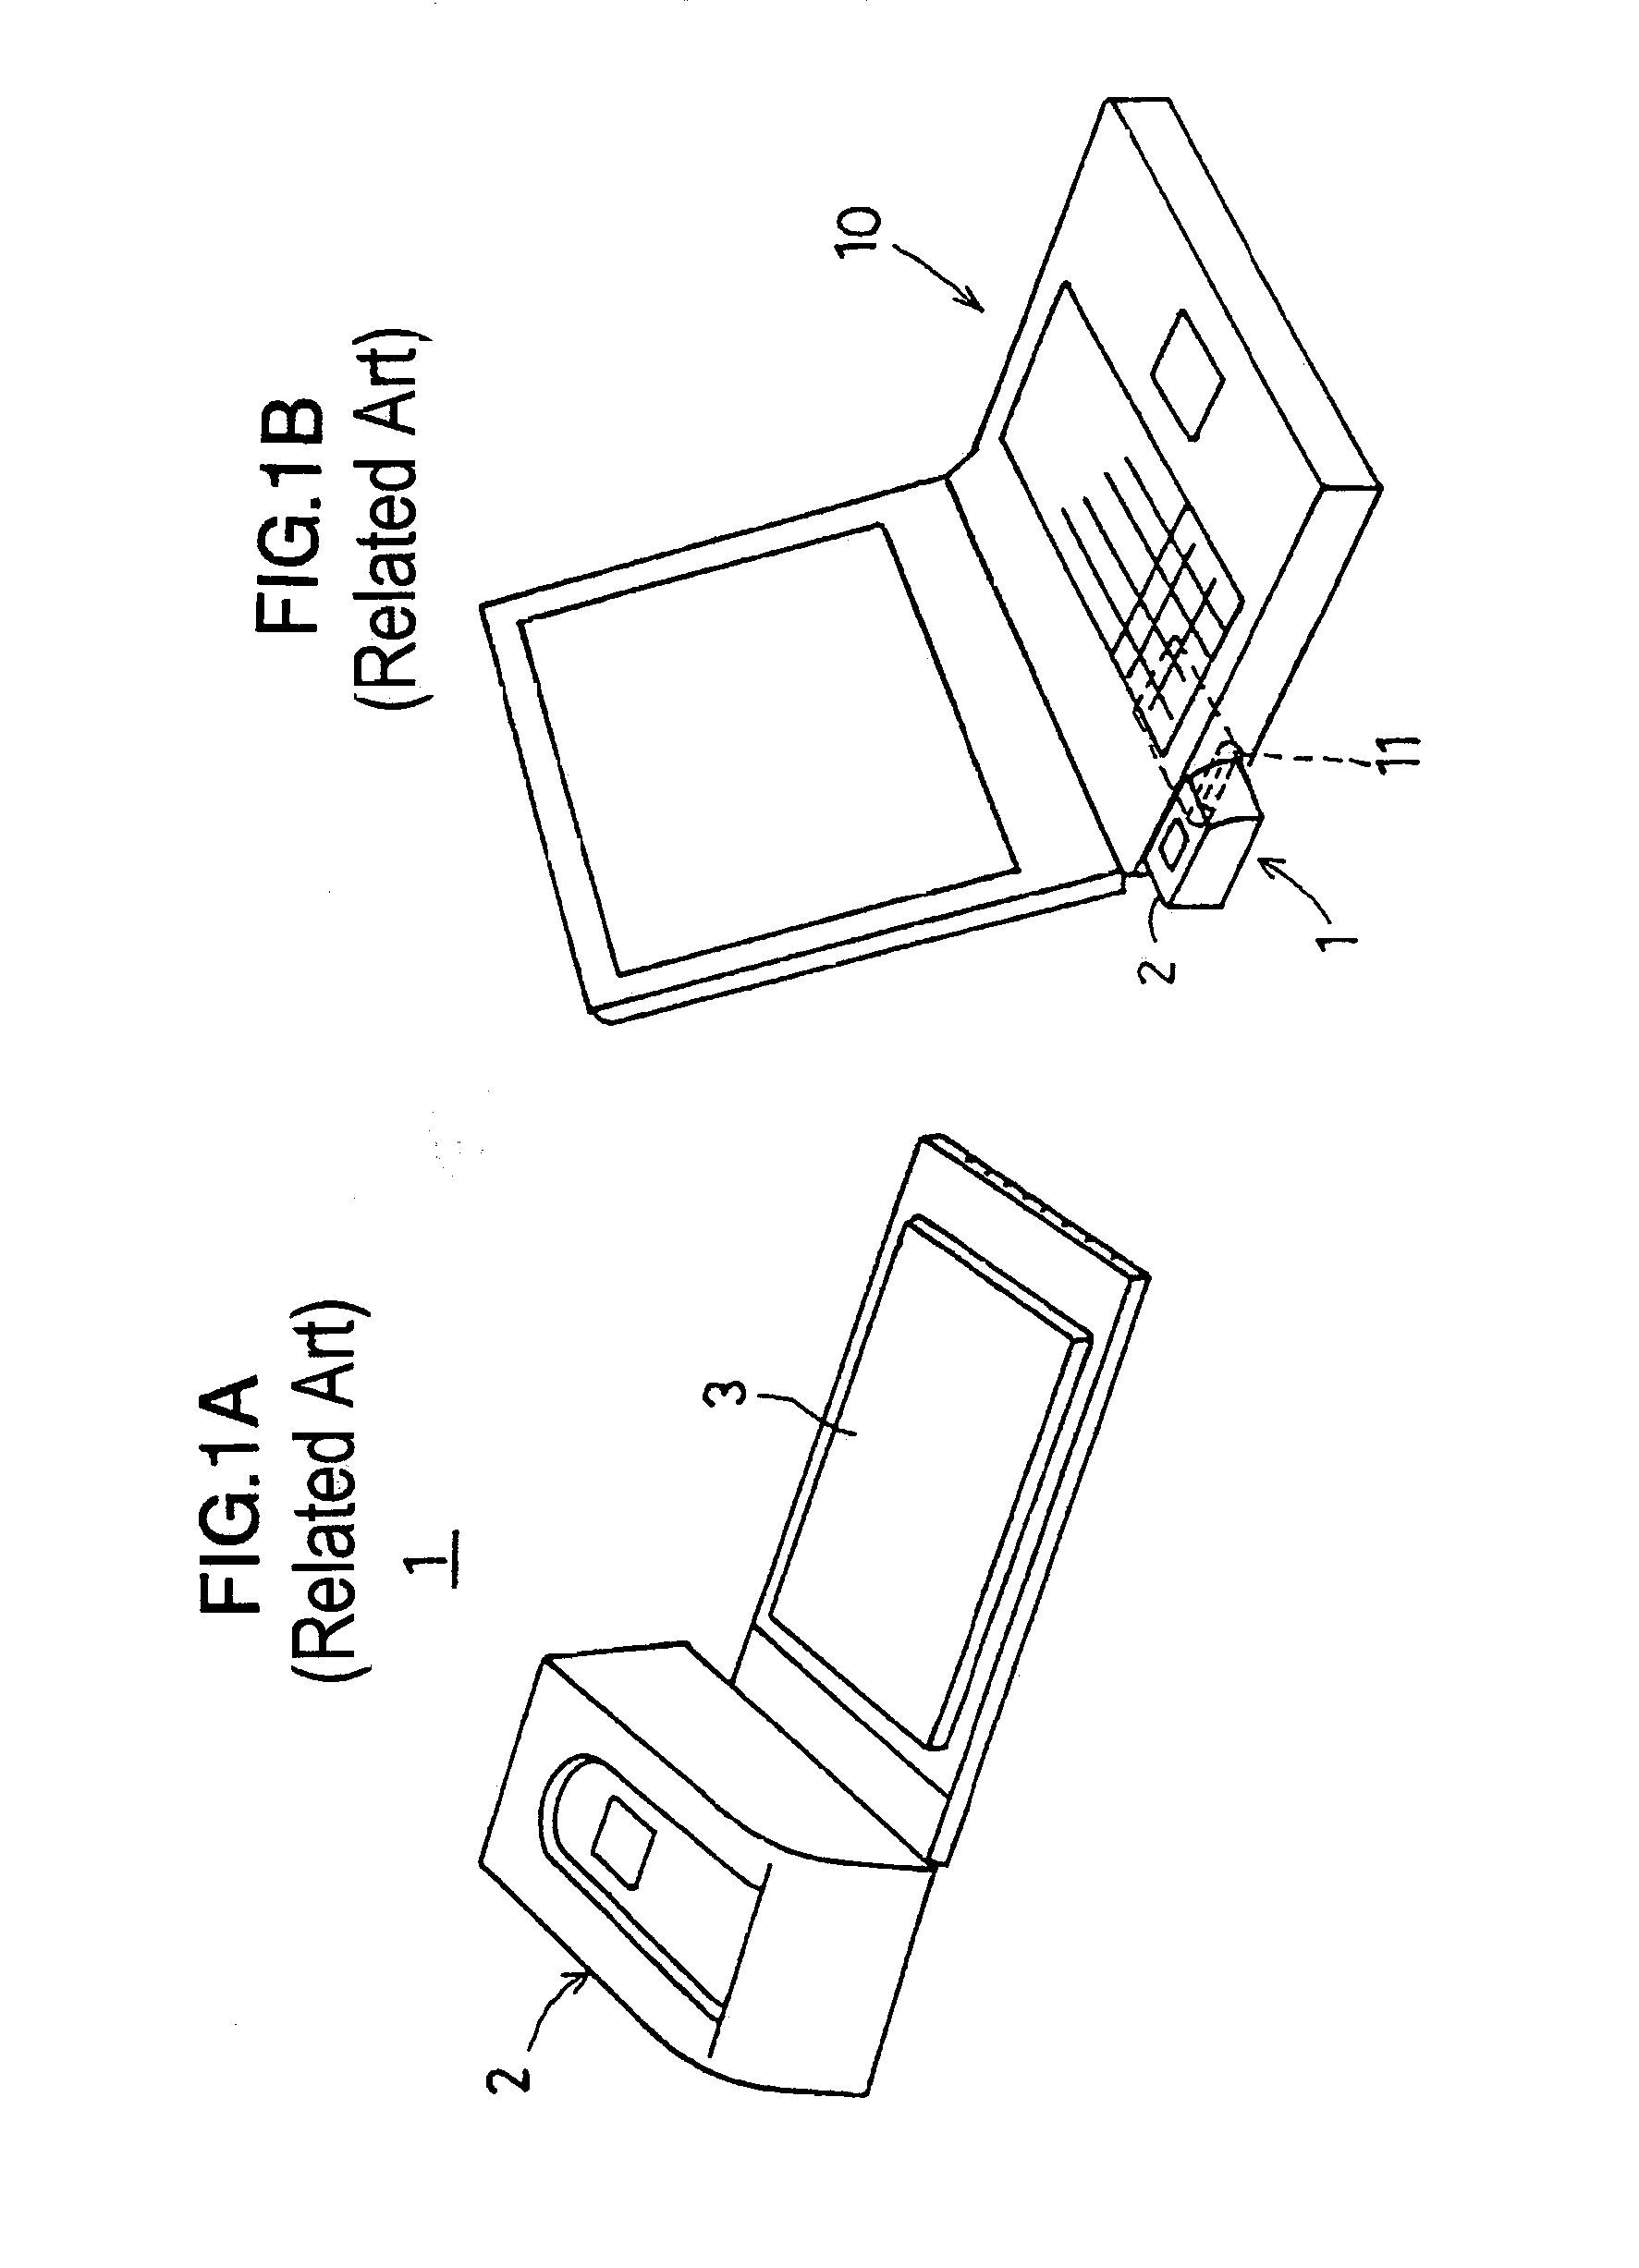 Extension device providing security function